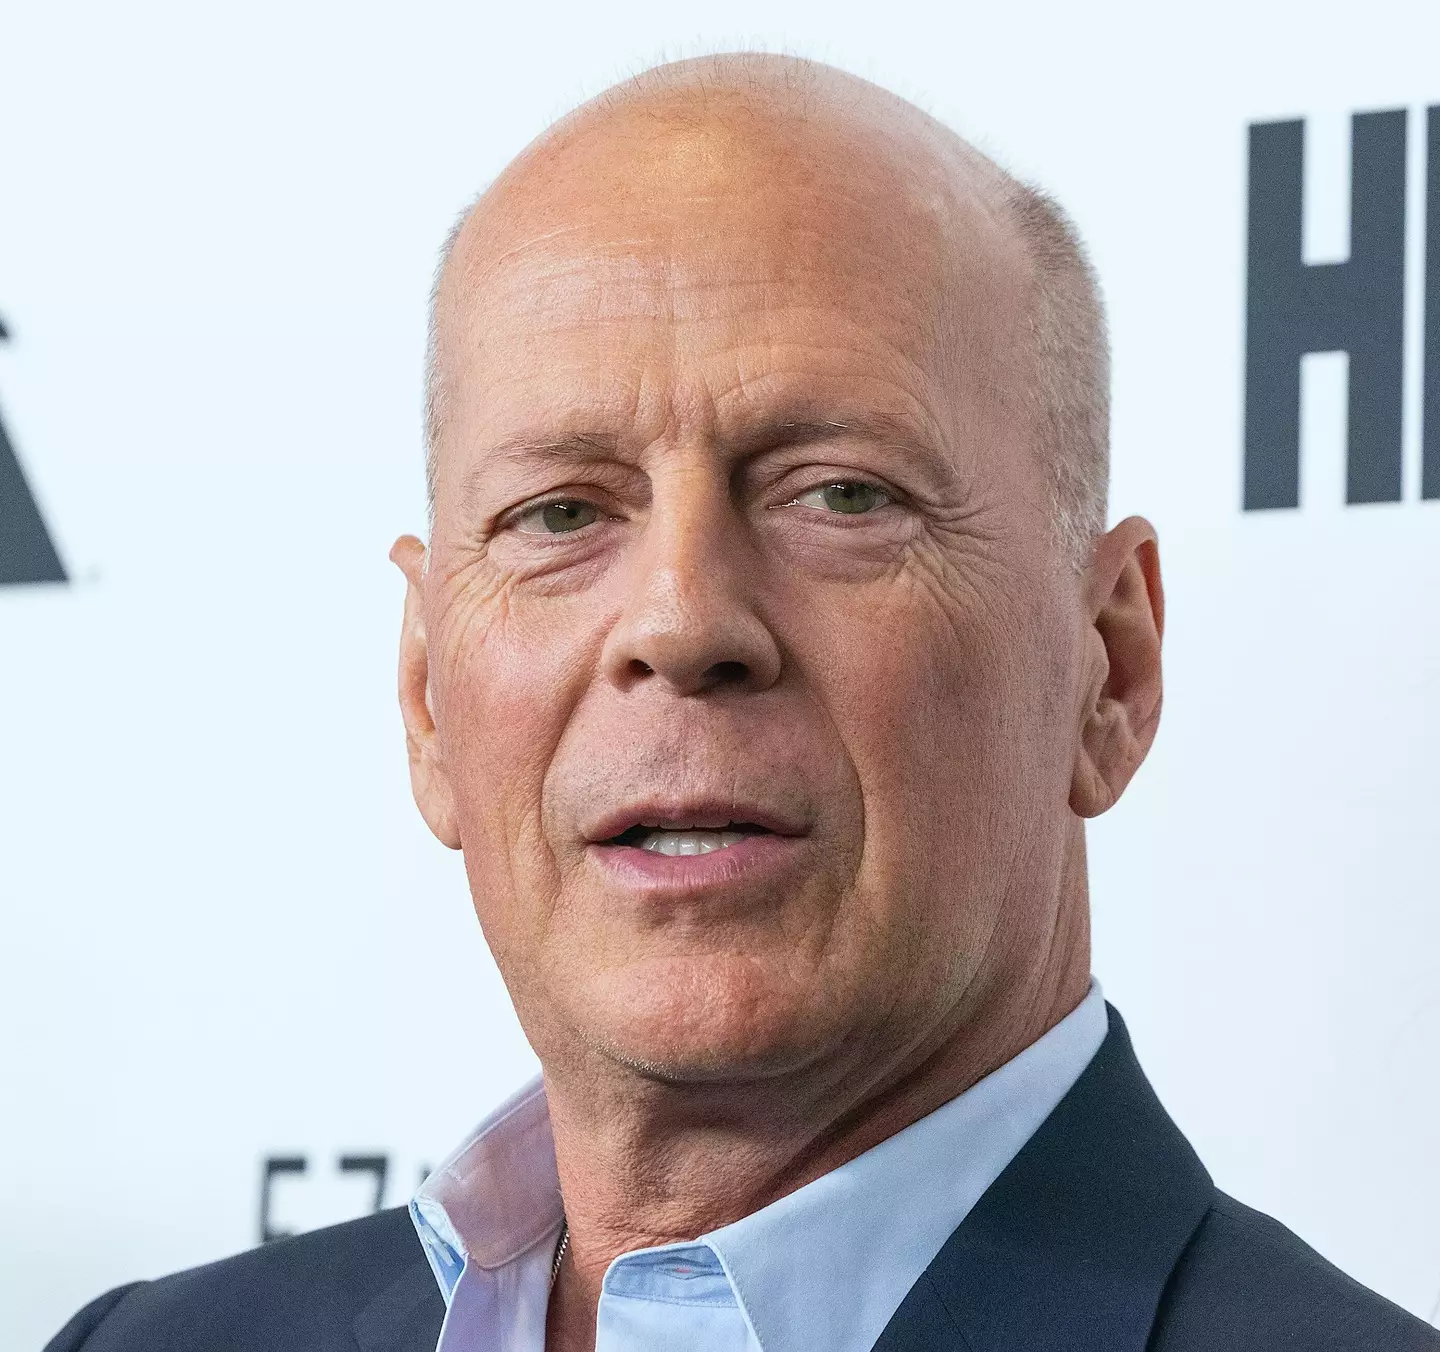 Bruce Willis' family announced his aphasia diagnosis earlier this year.